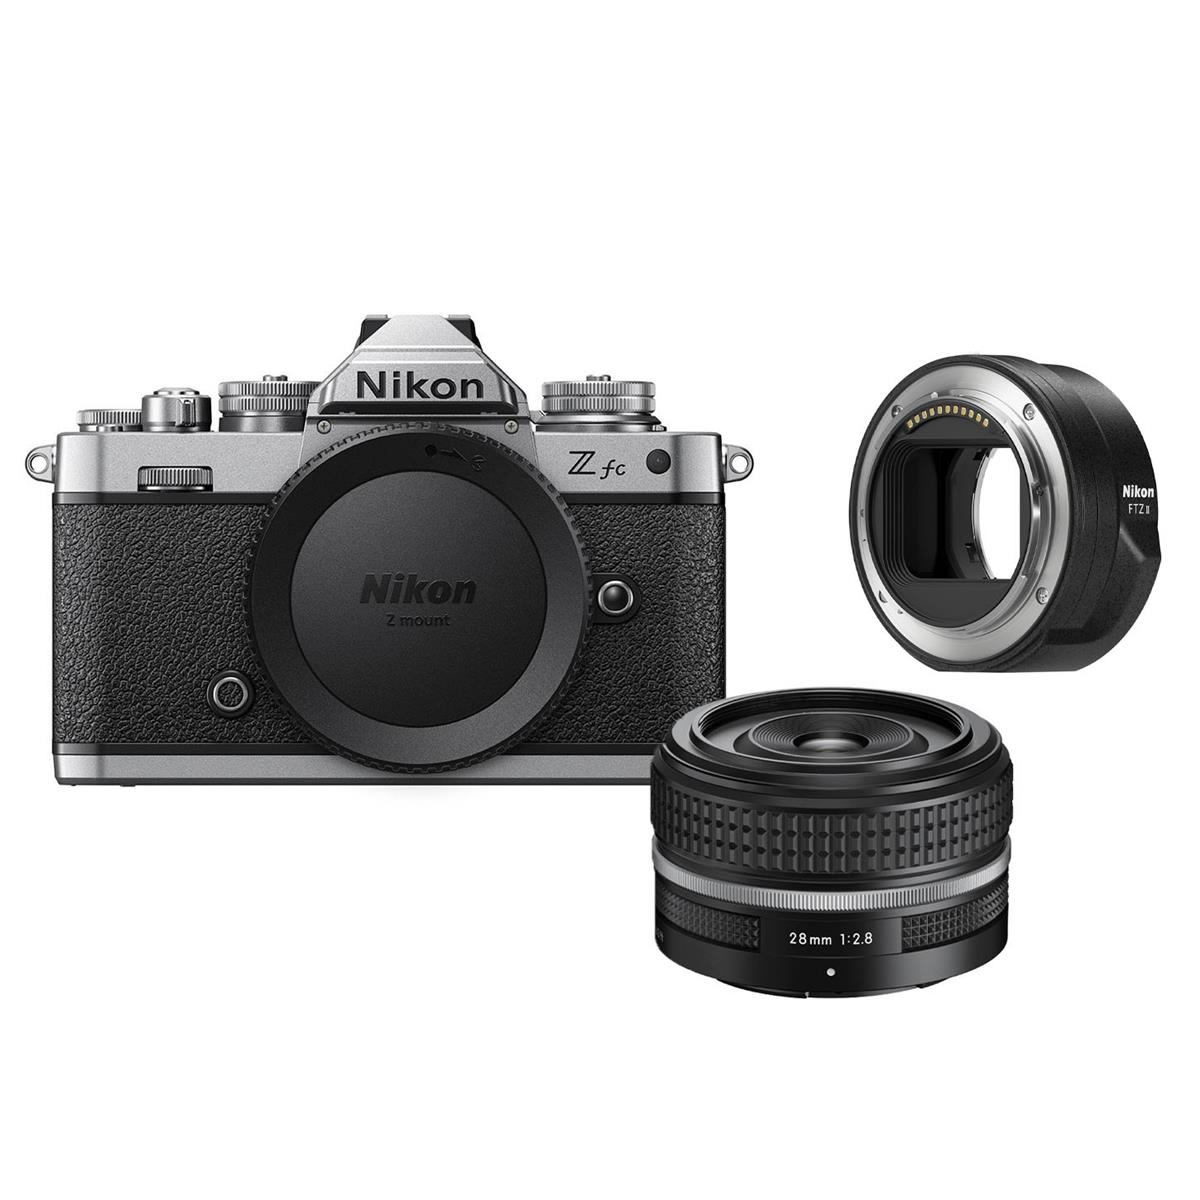 Image of Nikon Z fc DX-Format Mirrorless Camera with 28mm f/2.8 Lens and FTZ II Adapter